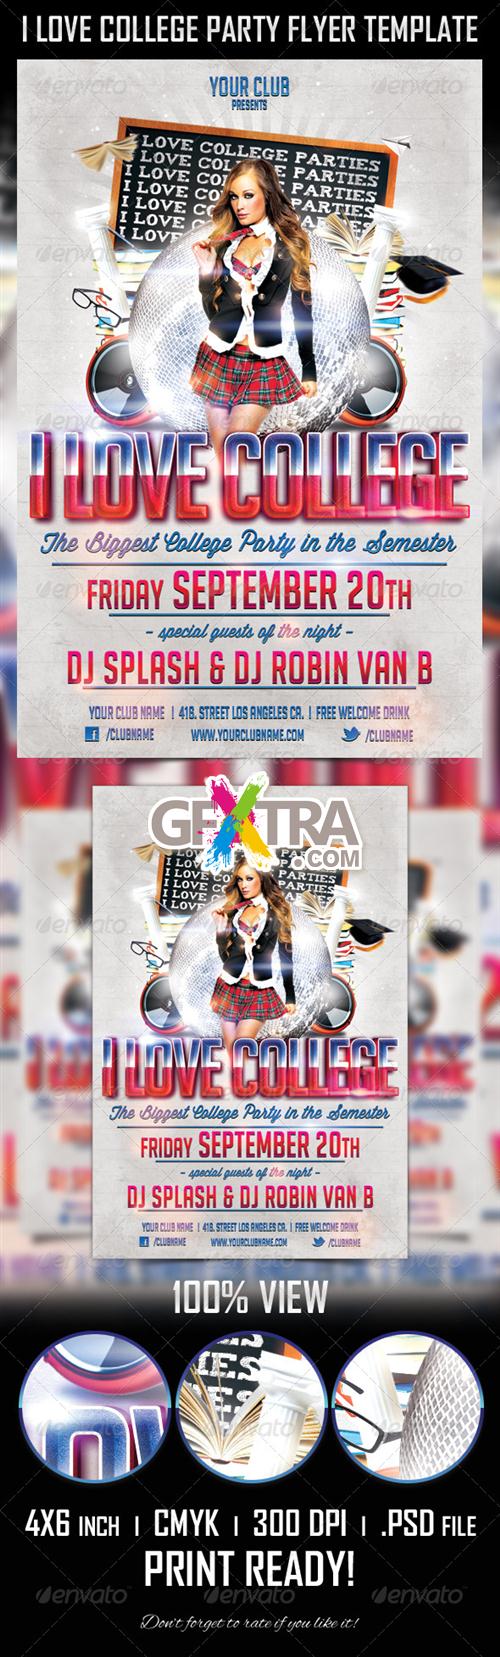 GraphicRiver - College Party Flyer Template